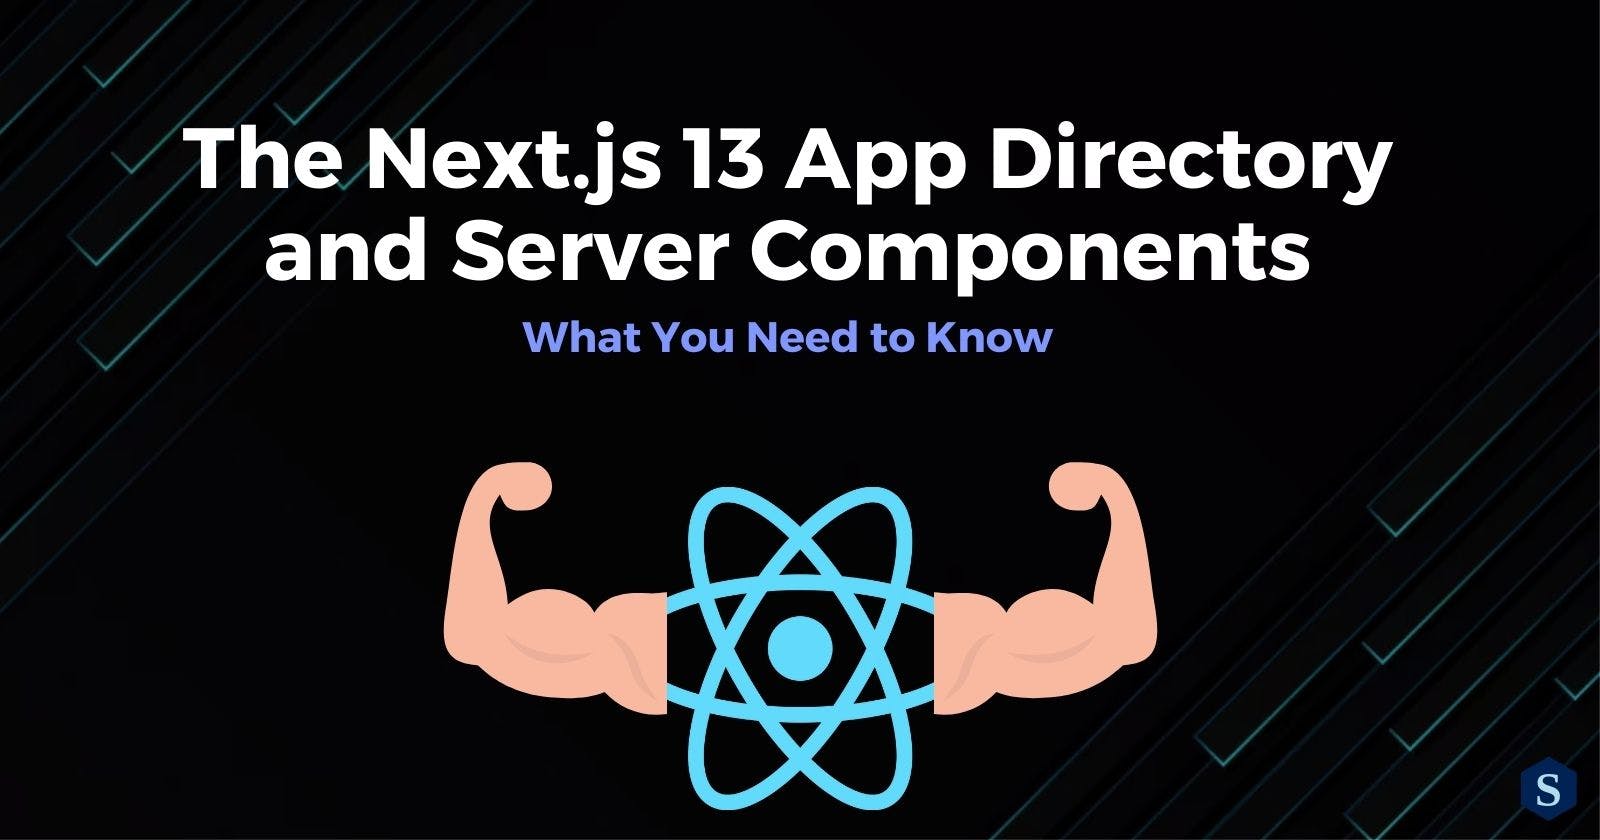 The Next.js 13 App Directory and Server Components: What You Need to Know